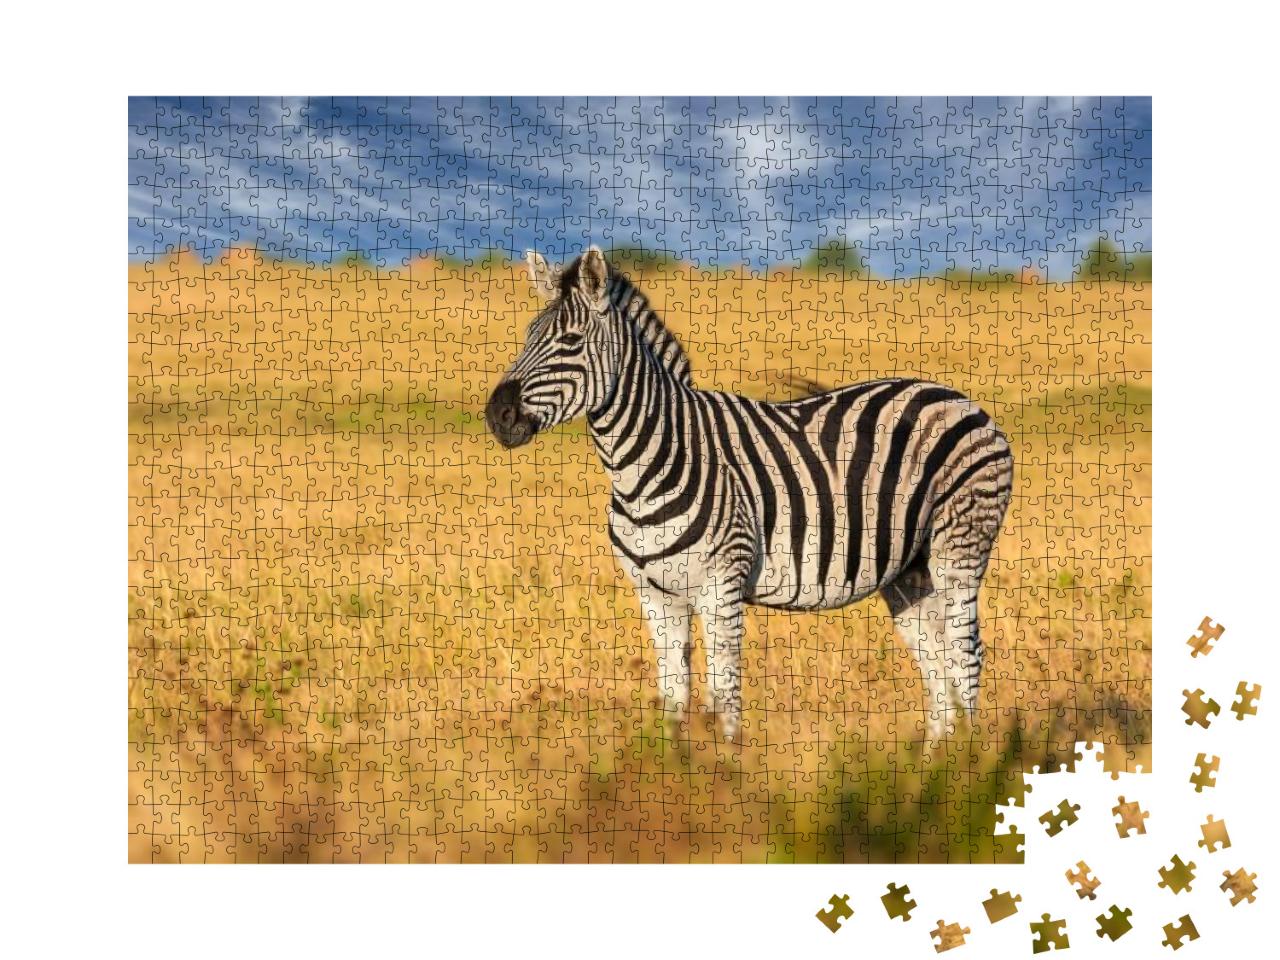 African Plains Zebra on the Dry Brown Savannah Grasslands... Jigsaw Puzzle with 1000 pieces